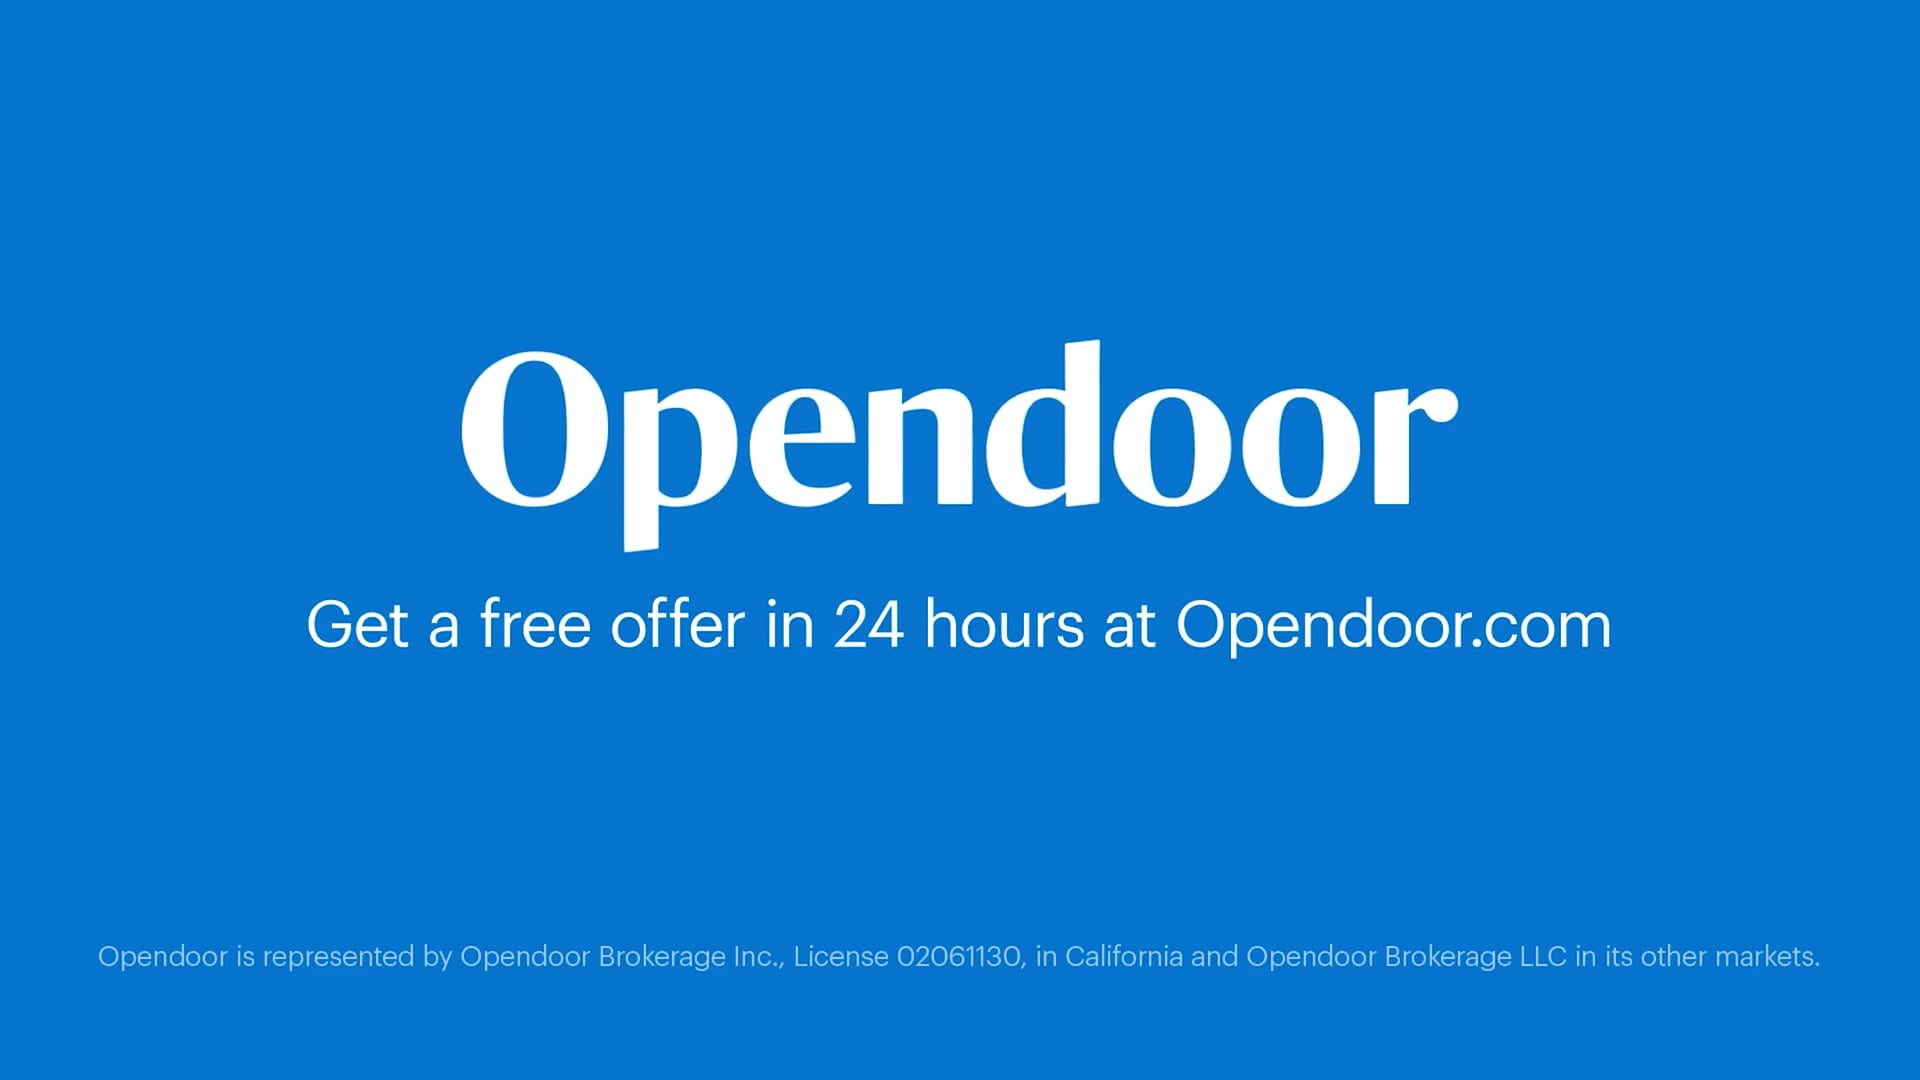 Sell Your Home - Opendoor